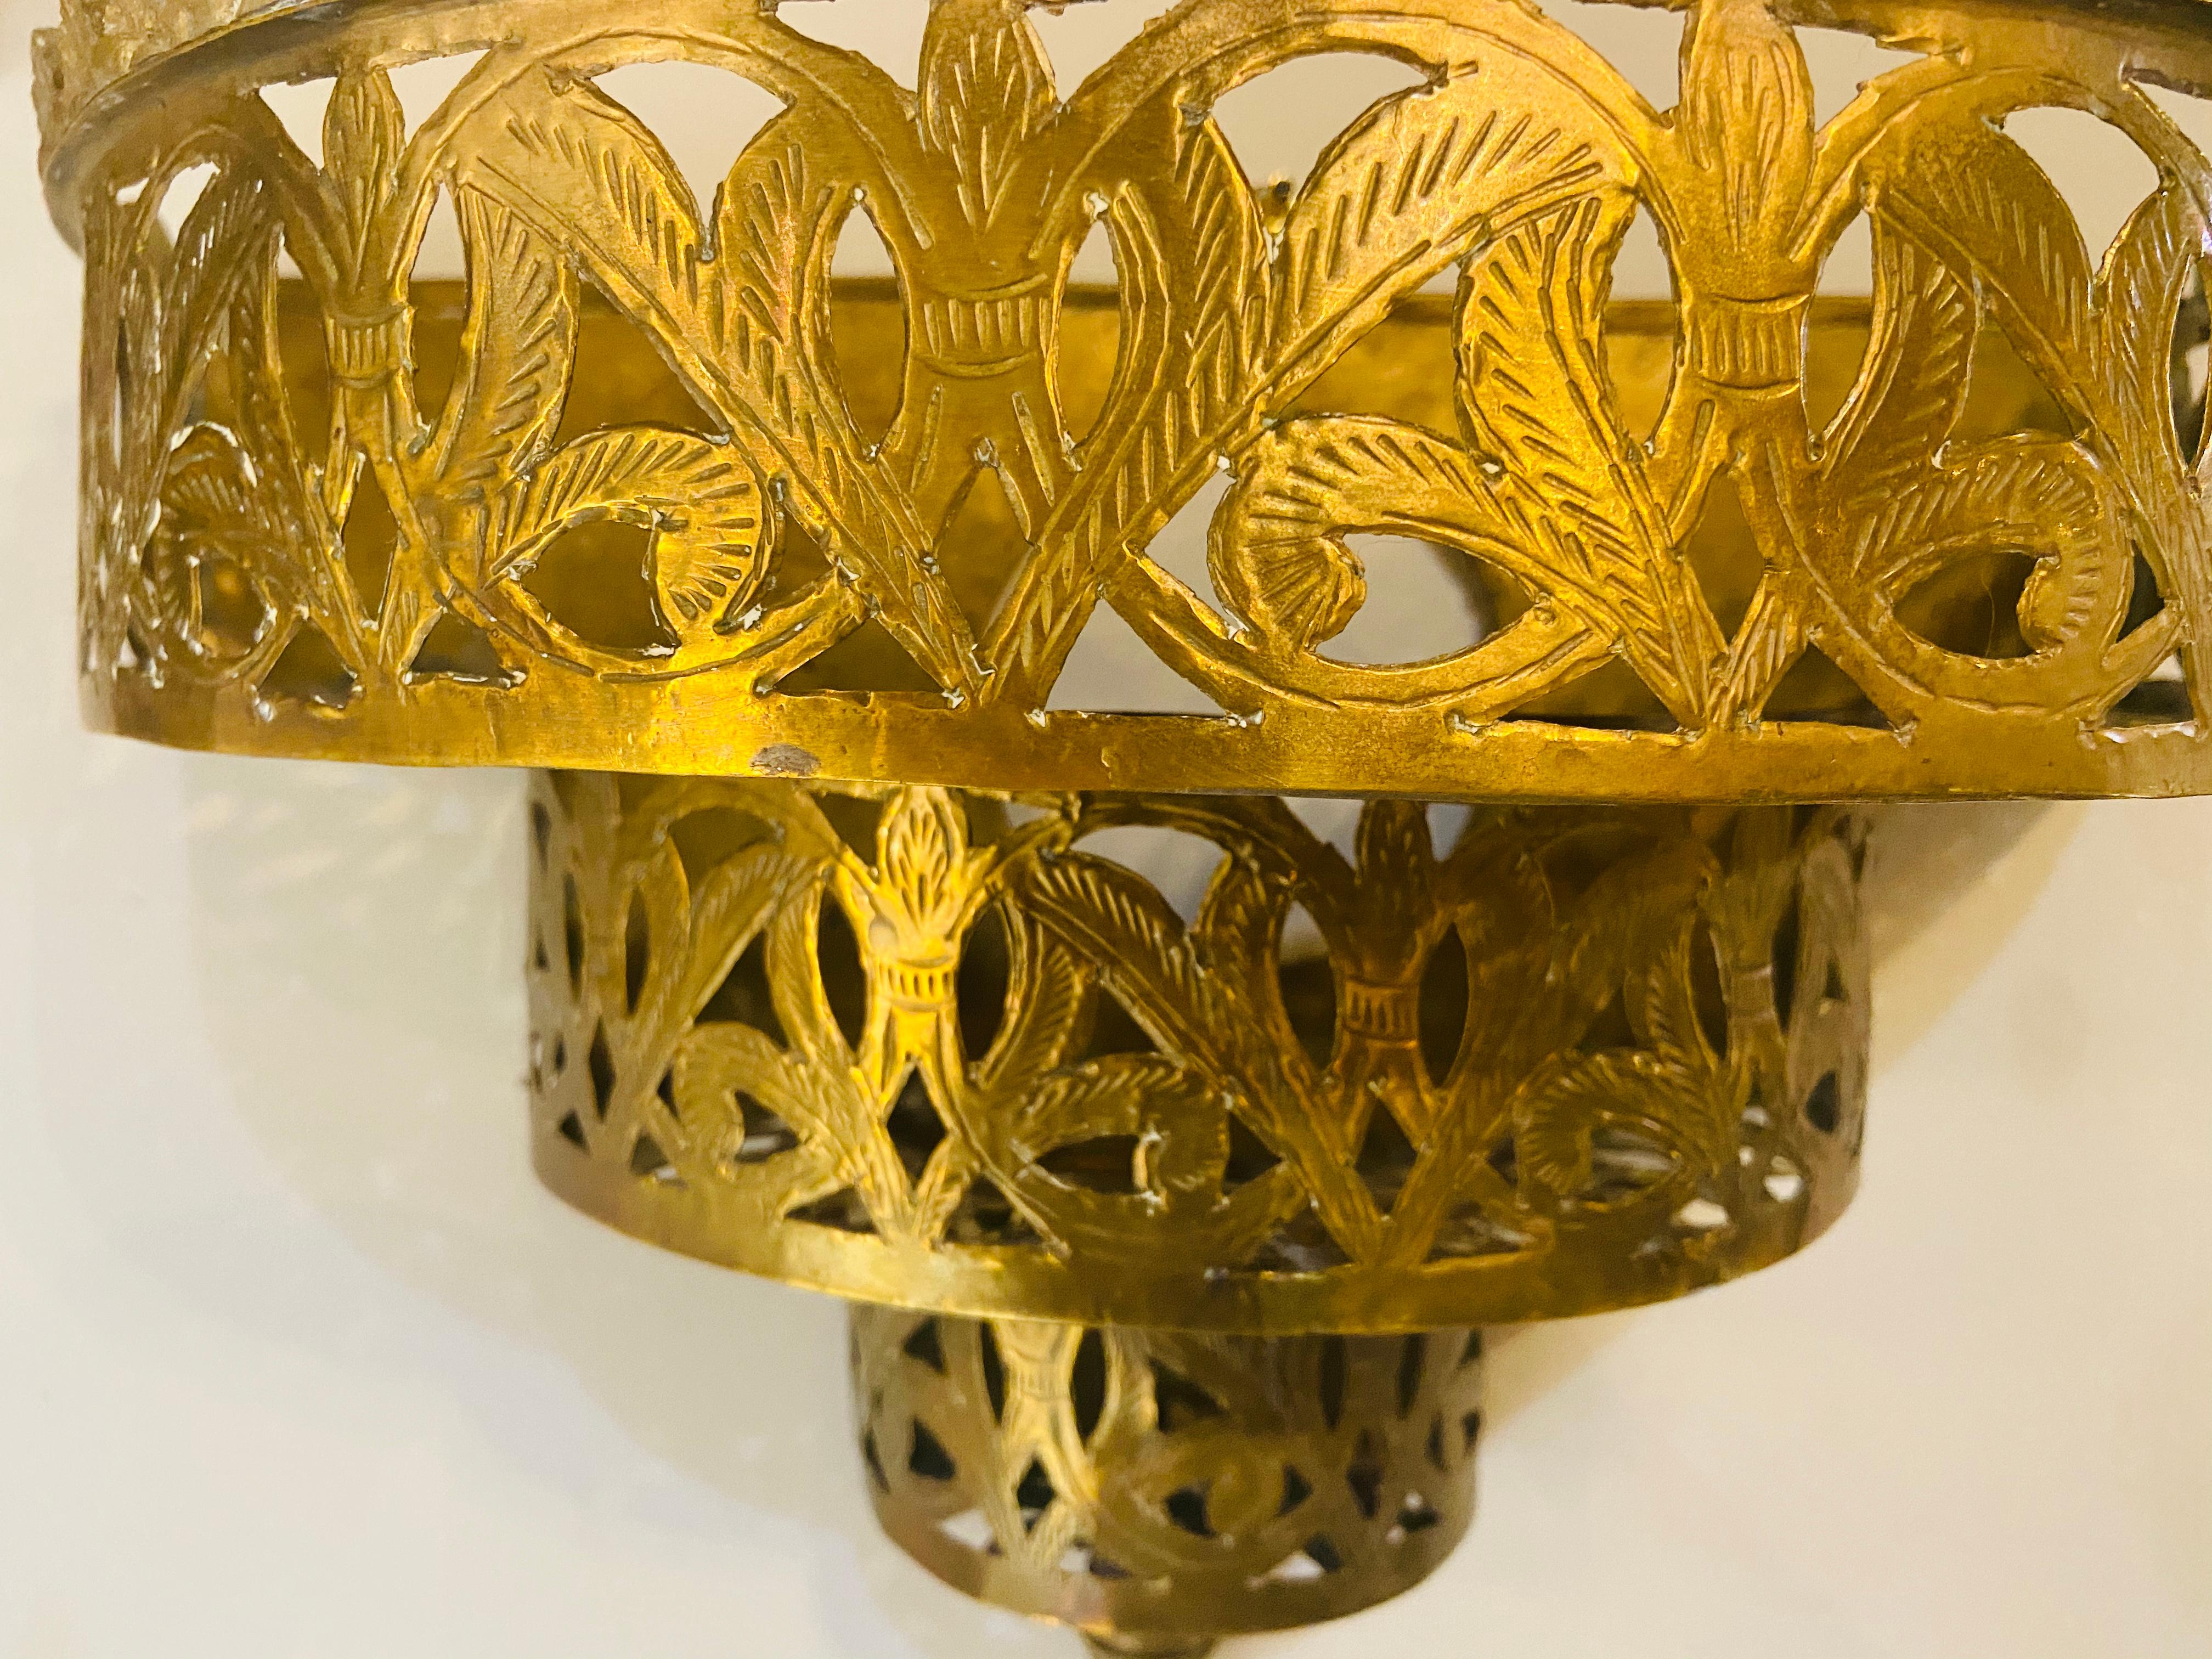 Demilune brass Moroccan wall sconce, a pair
The pair of wall sconces are beautifully handmade using filigree style to create a stylish Moorish design in a demilune shape. The sconces are made of brass and are not wired.
They can be wired upon